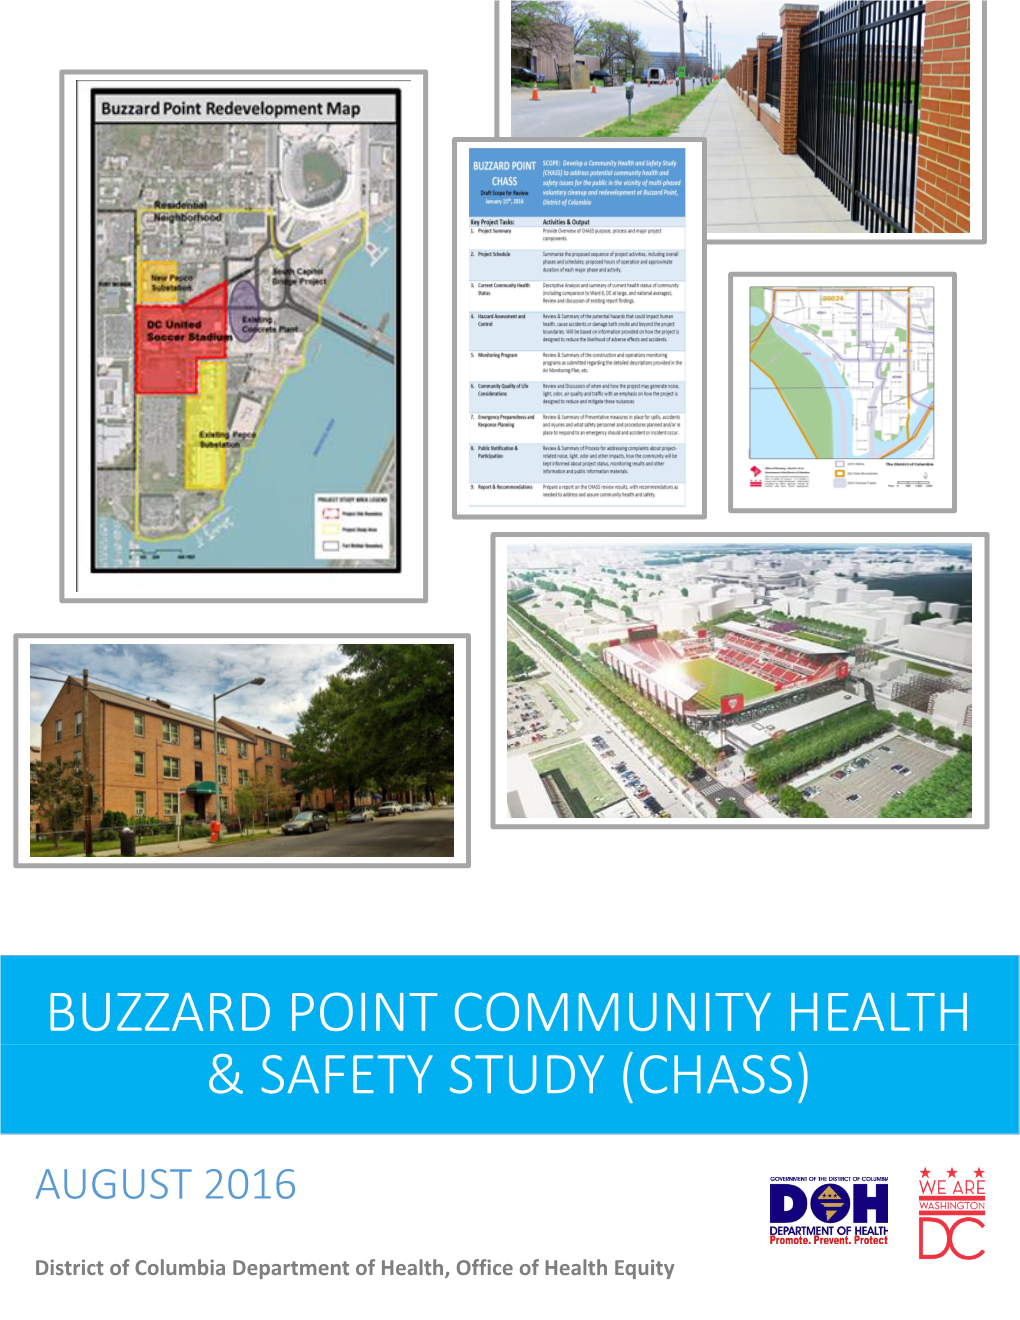 Buzzard Point Community Health & Safety Study (Chass)